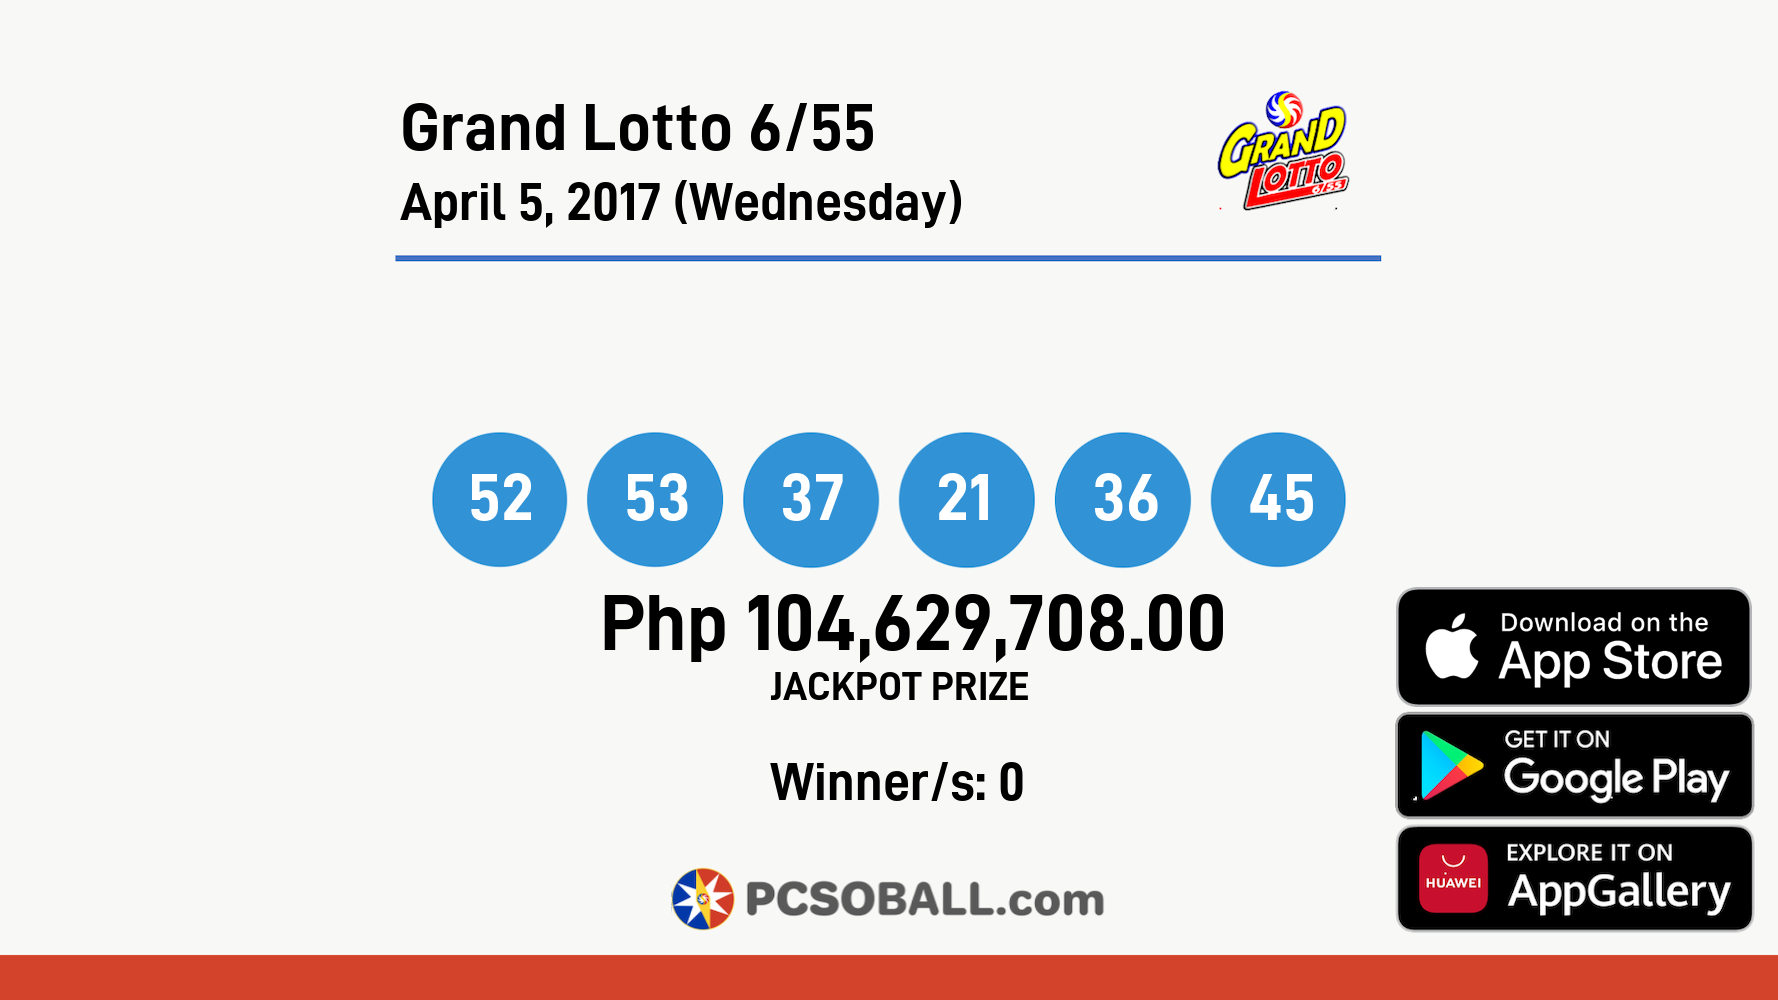 Grand Lotto 6/55 April 5, 2017 (Wednesday) Result